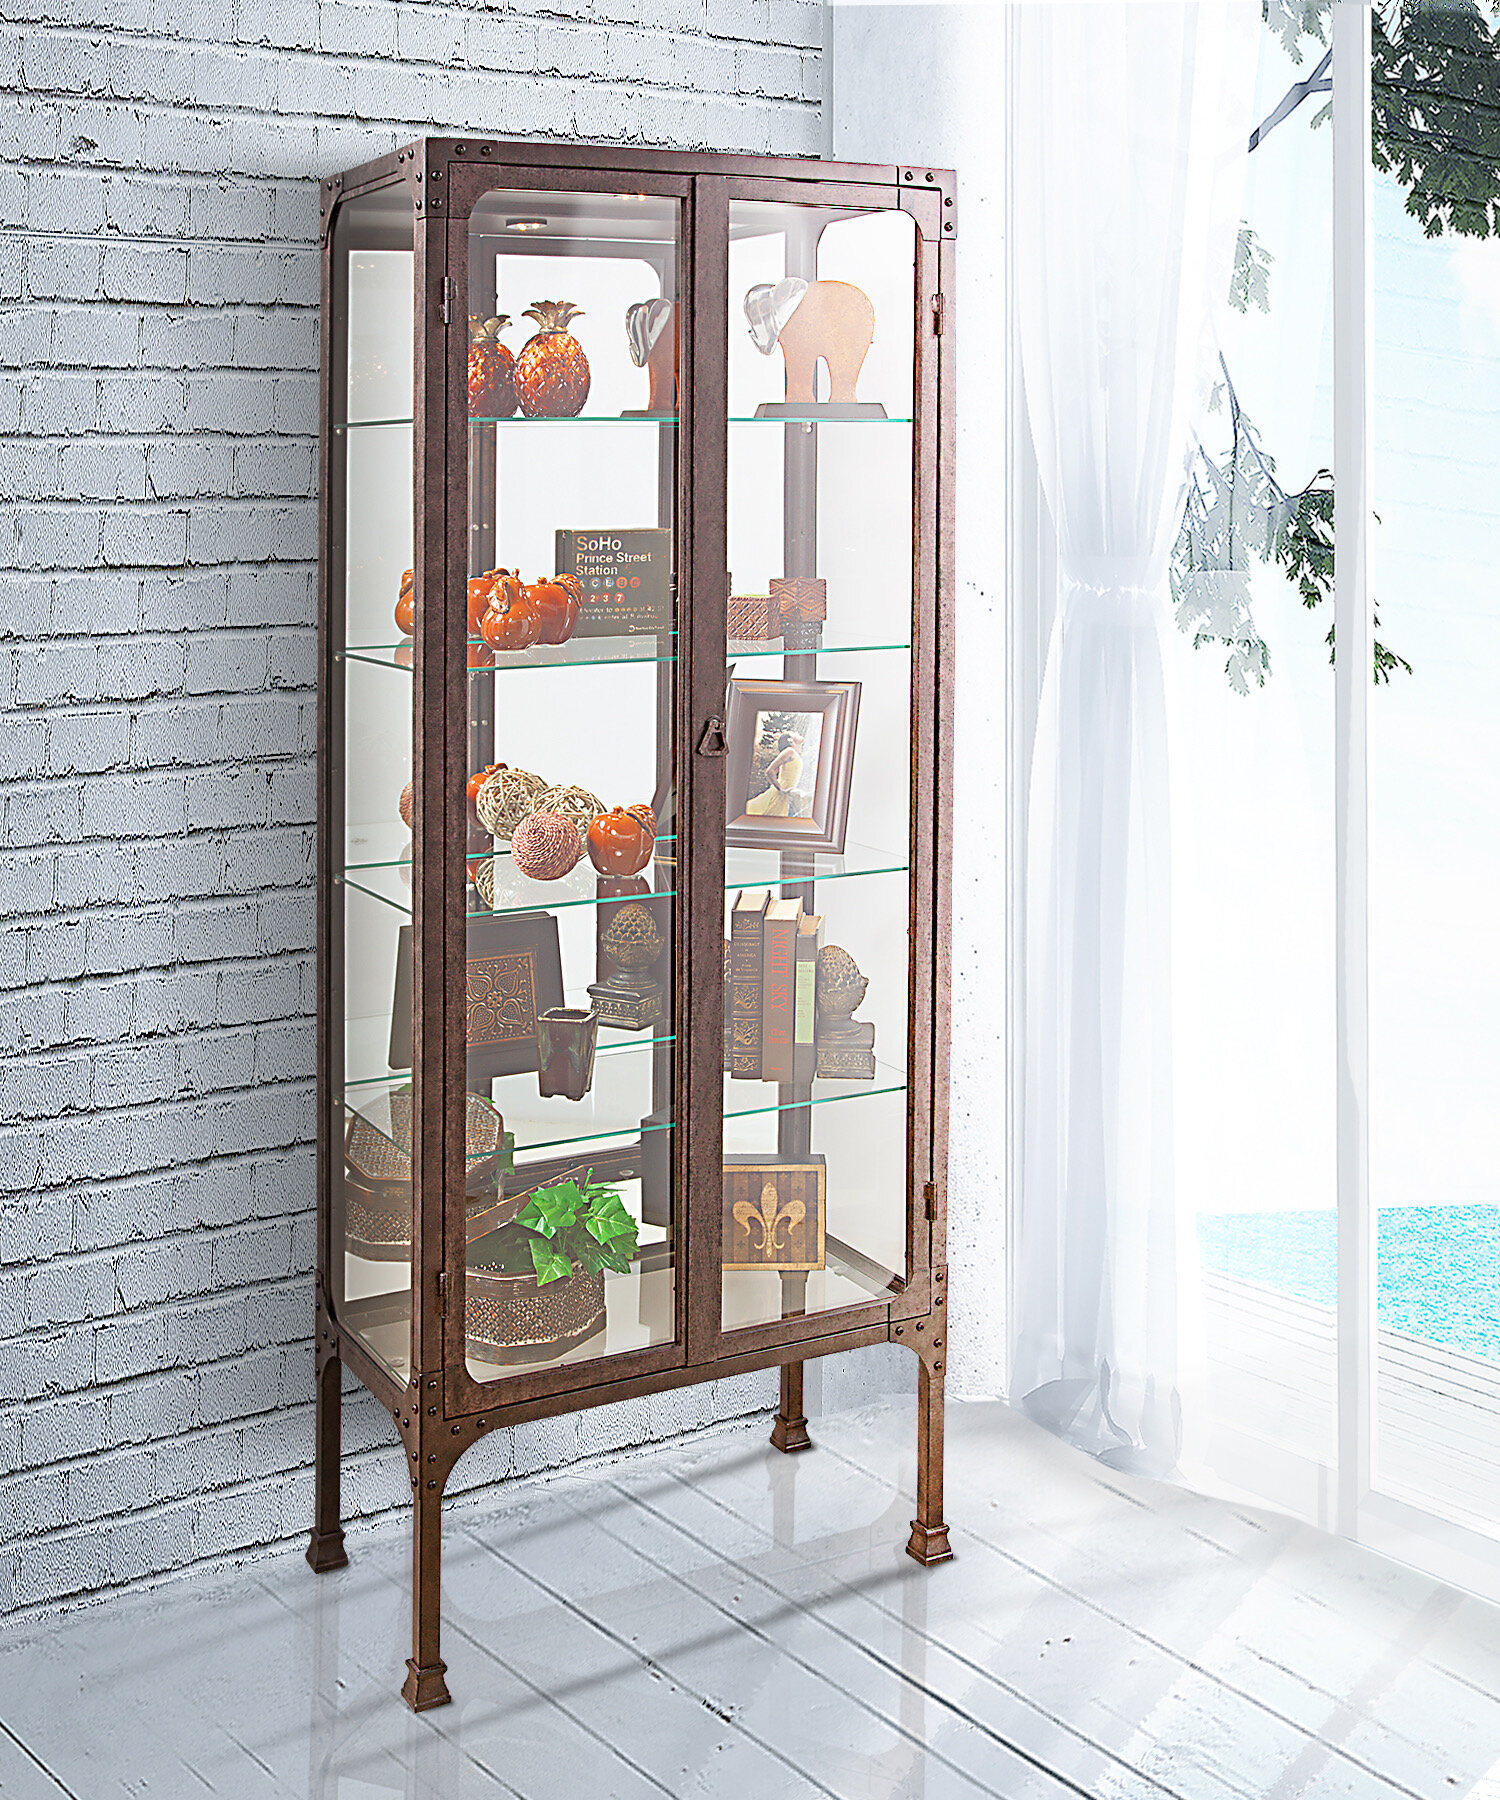 Williston Forge Whittlesey Lighted Curio Cabinet Reviews Wayfair